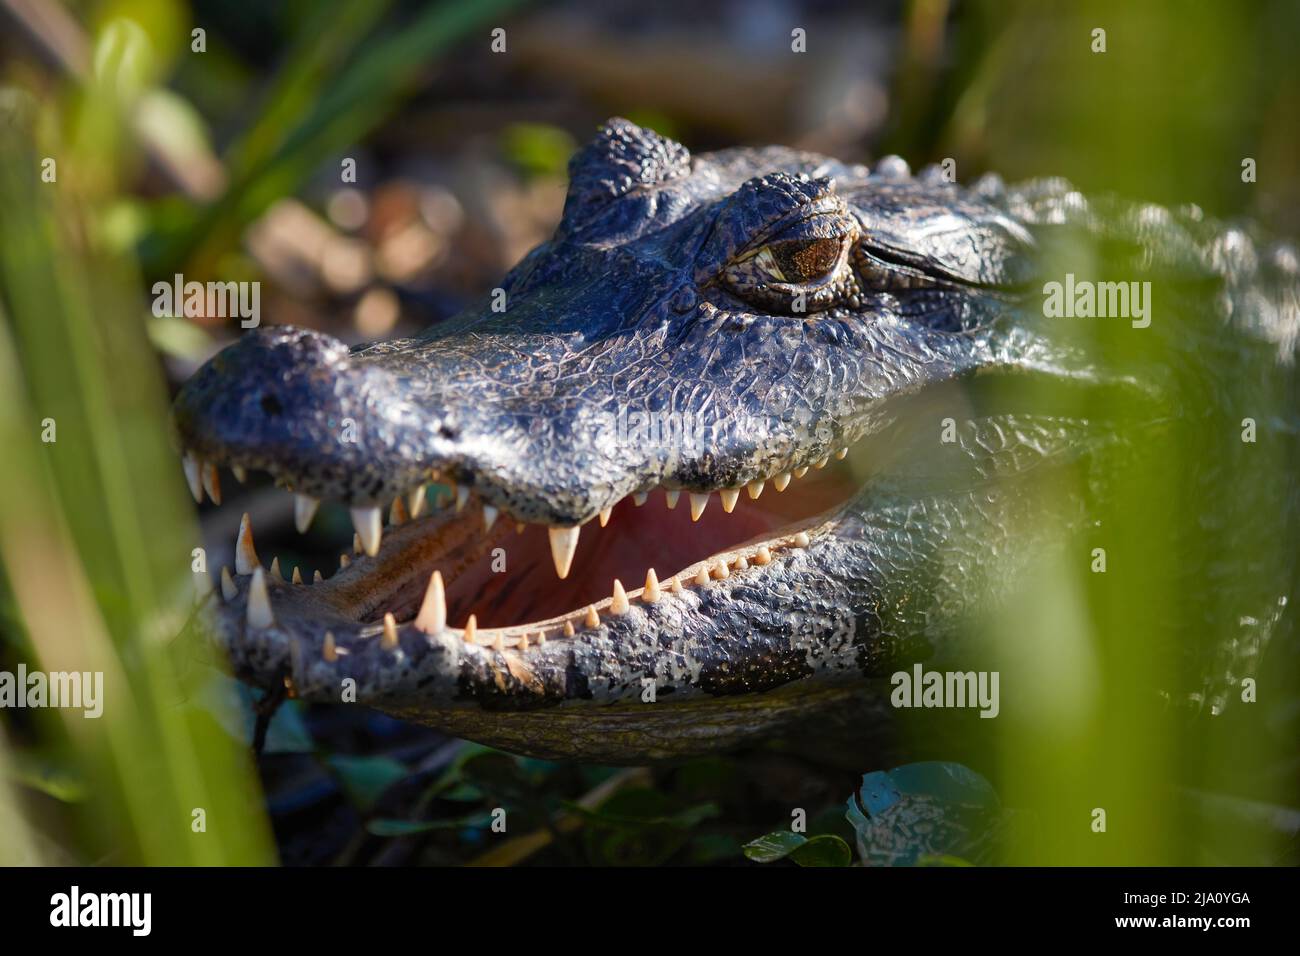 Close-up of a caiman (Yacare Caiman) in the Ibera National Park, Corrientes province, Argentina. Stock Photo